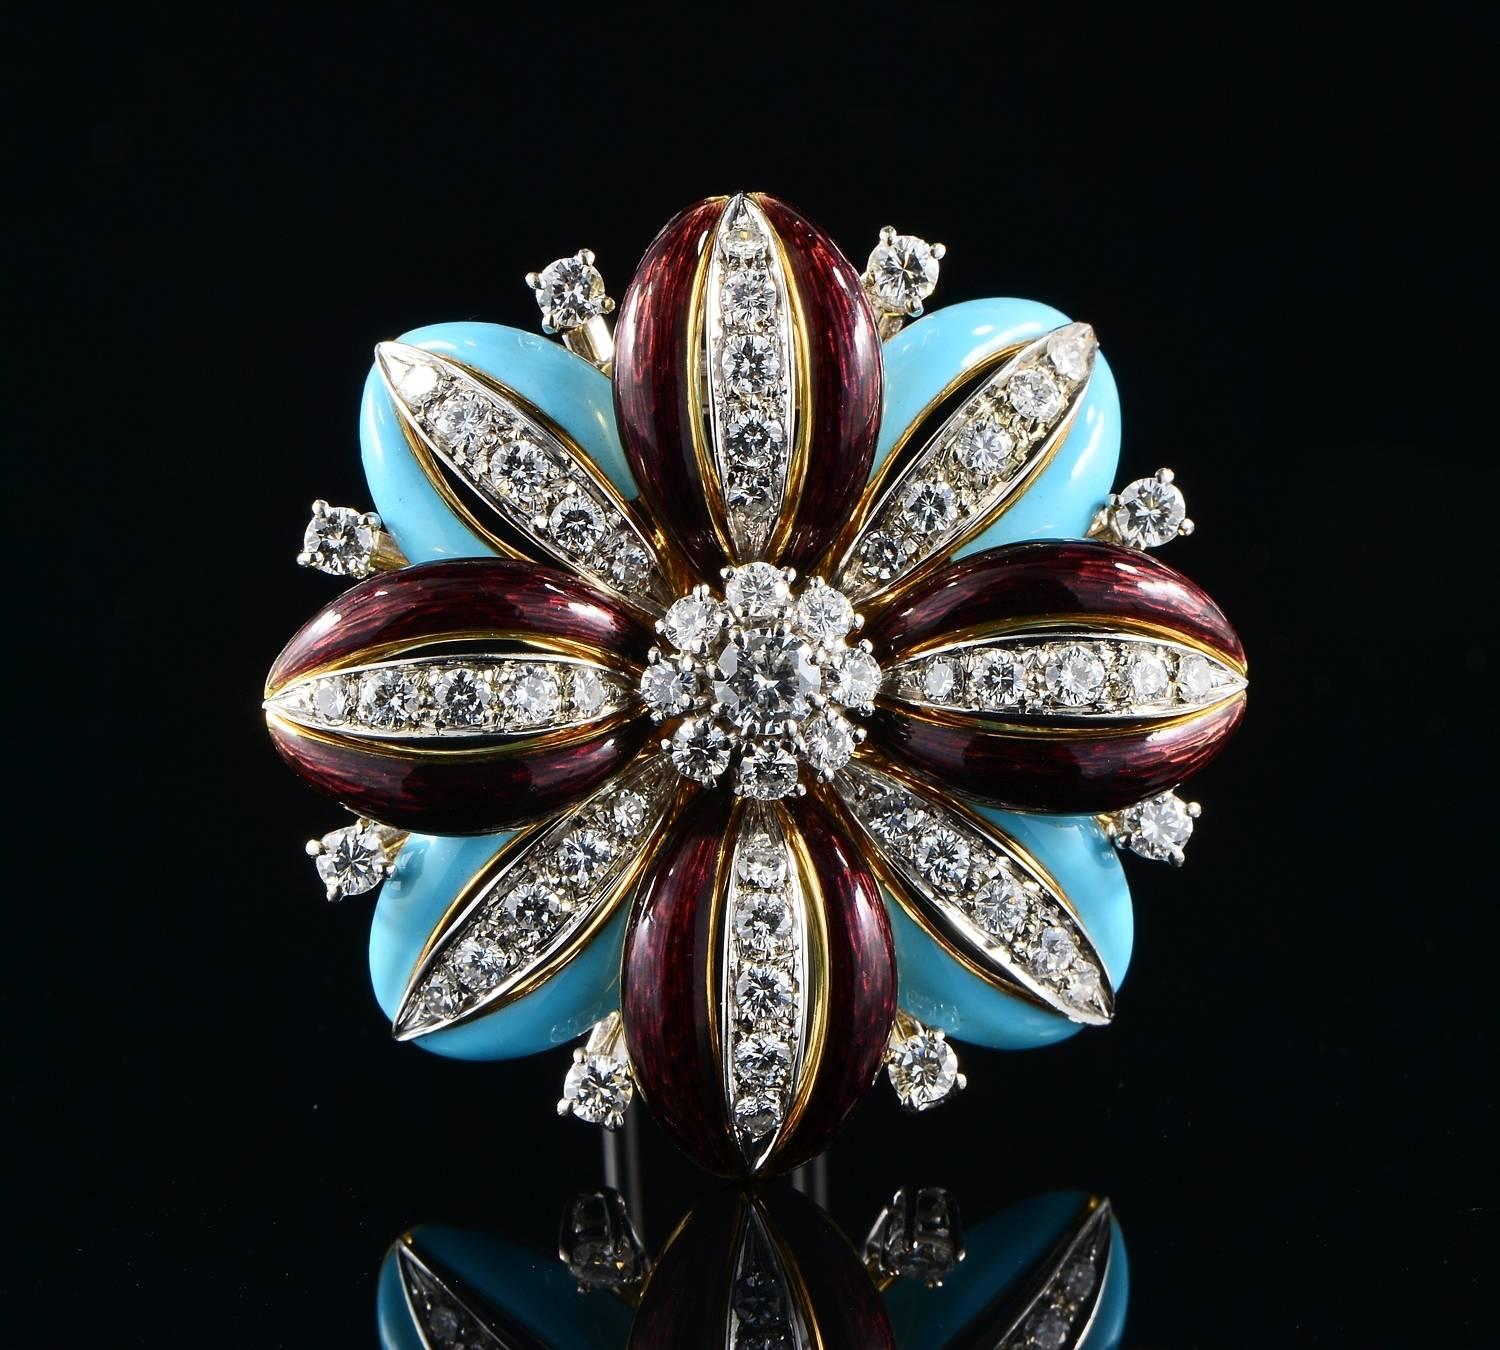 Large beautiful design flower boasting exquisite top quality past craftsmanship made of solid 18KT white and rose gold.
Three dimensional multipetals adorned by Turquoise and Aubergine colour enamelling work fully highlighetd by approx 2.95 CT CT of